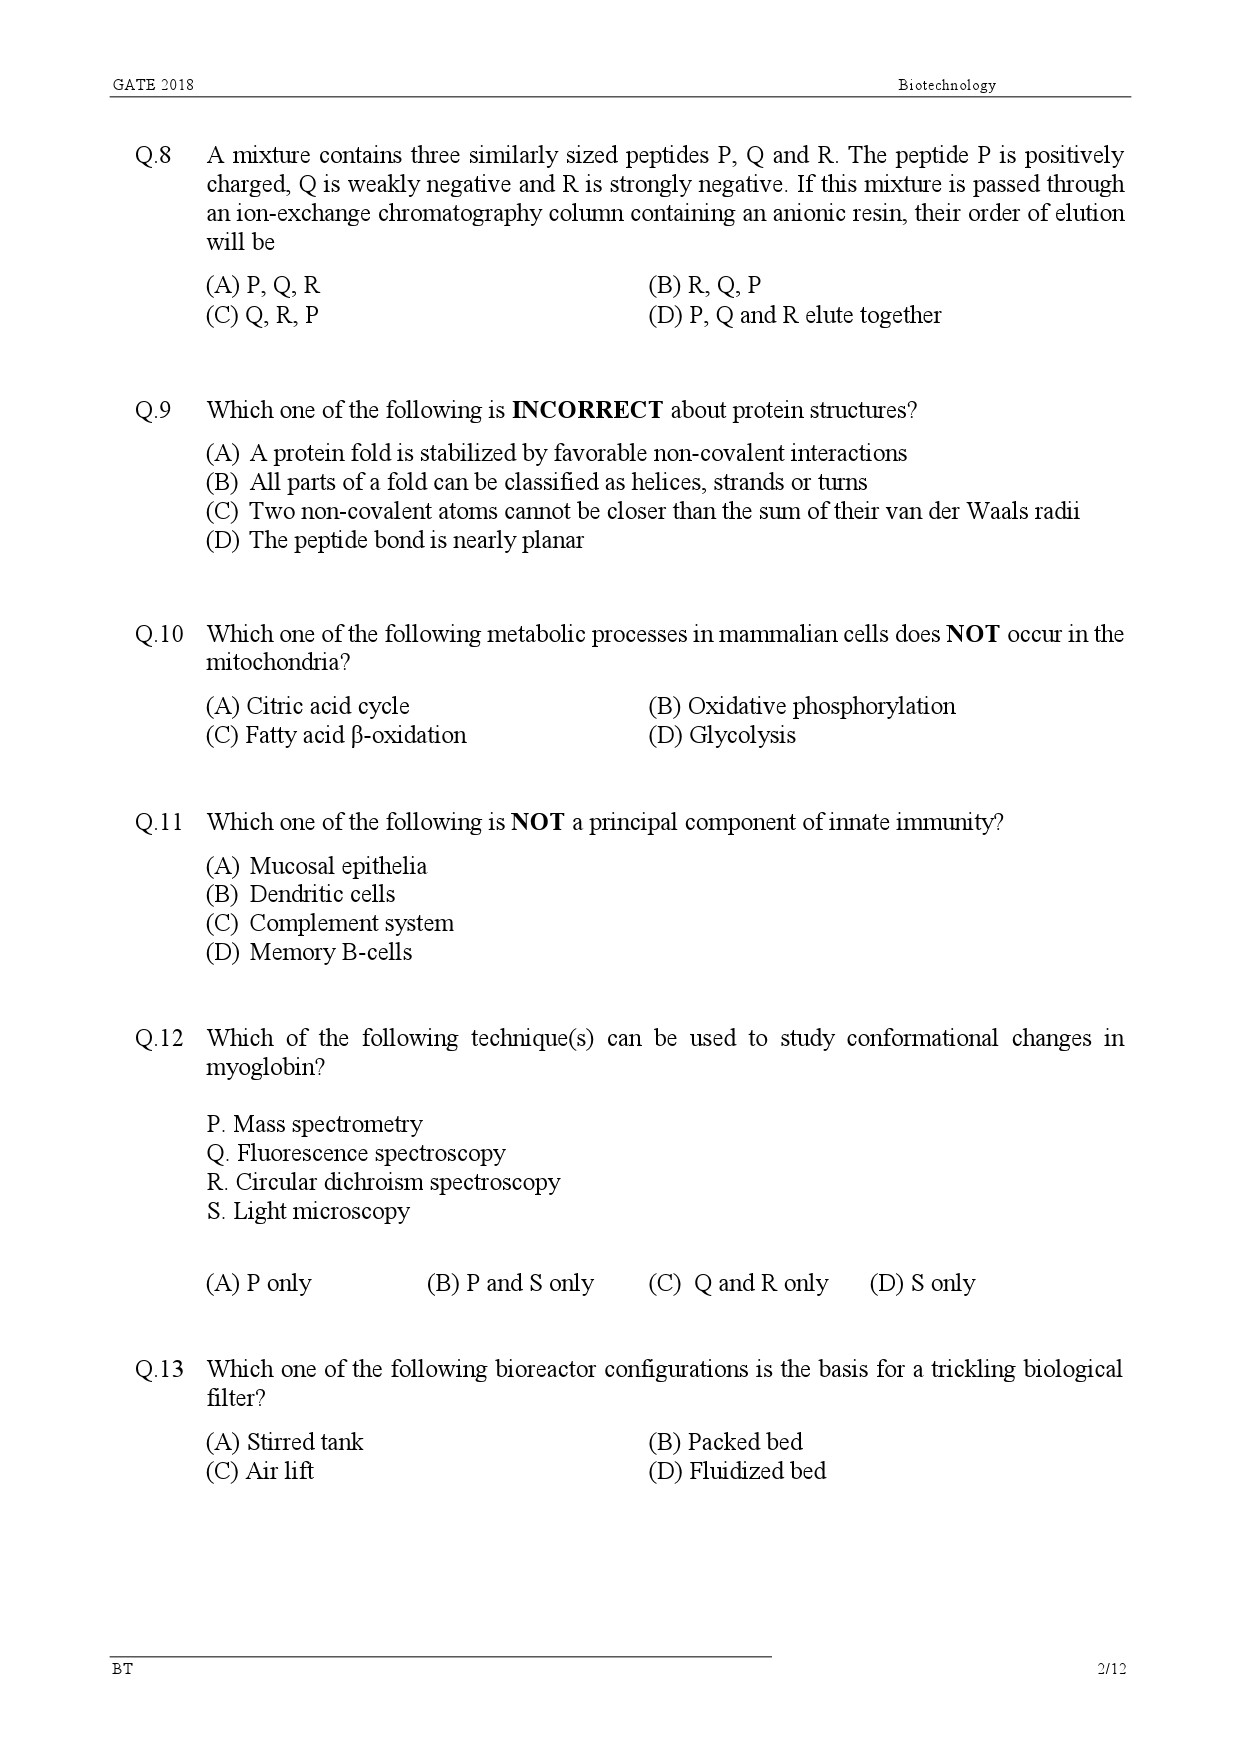 GATE Exam Question Paper 2018 Biotechnology 4